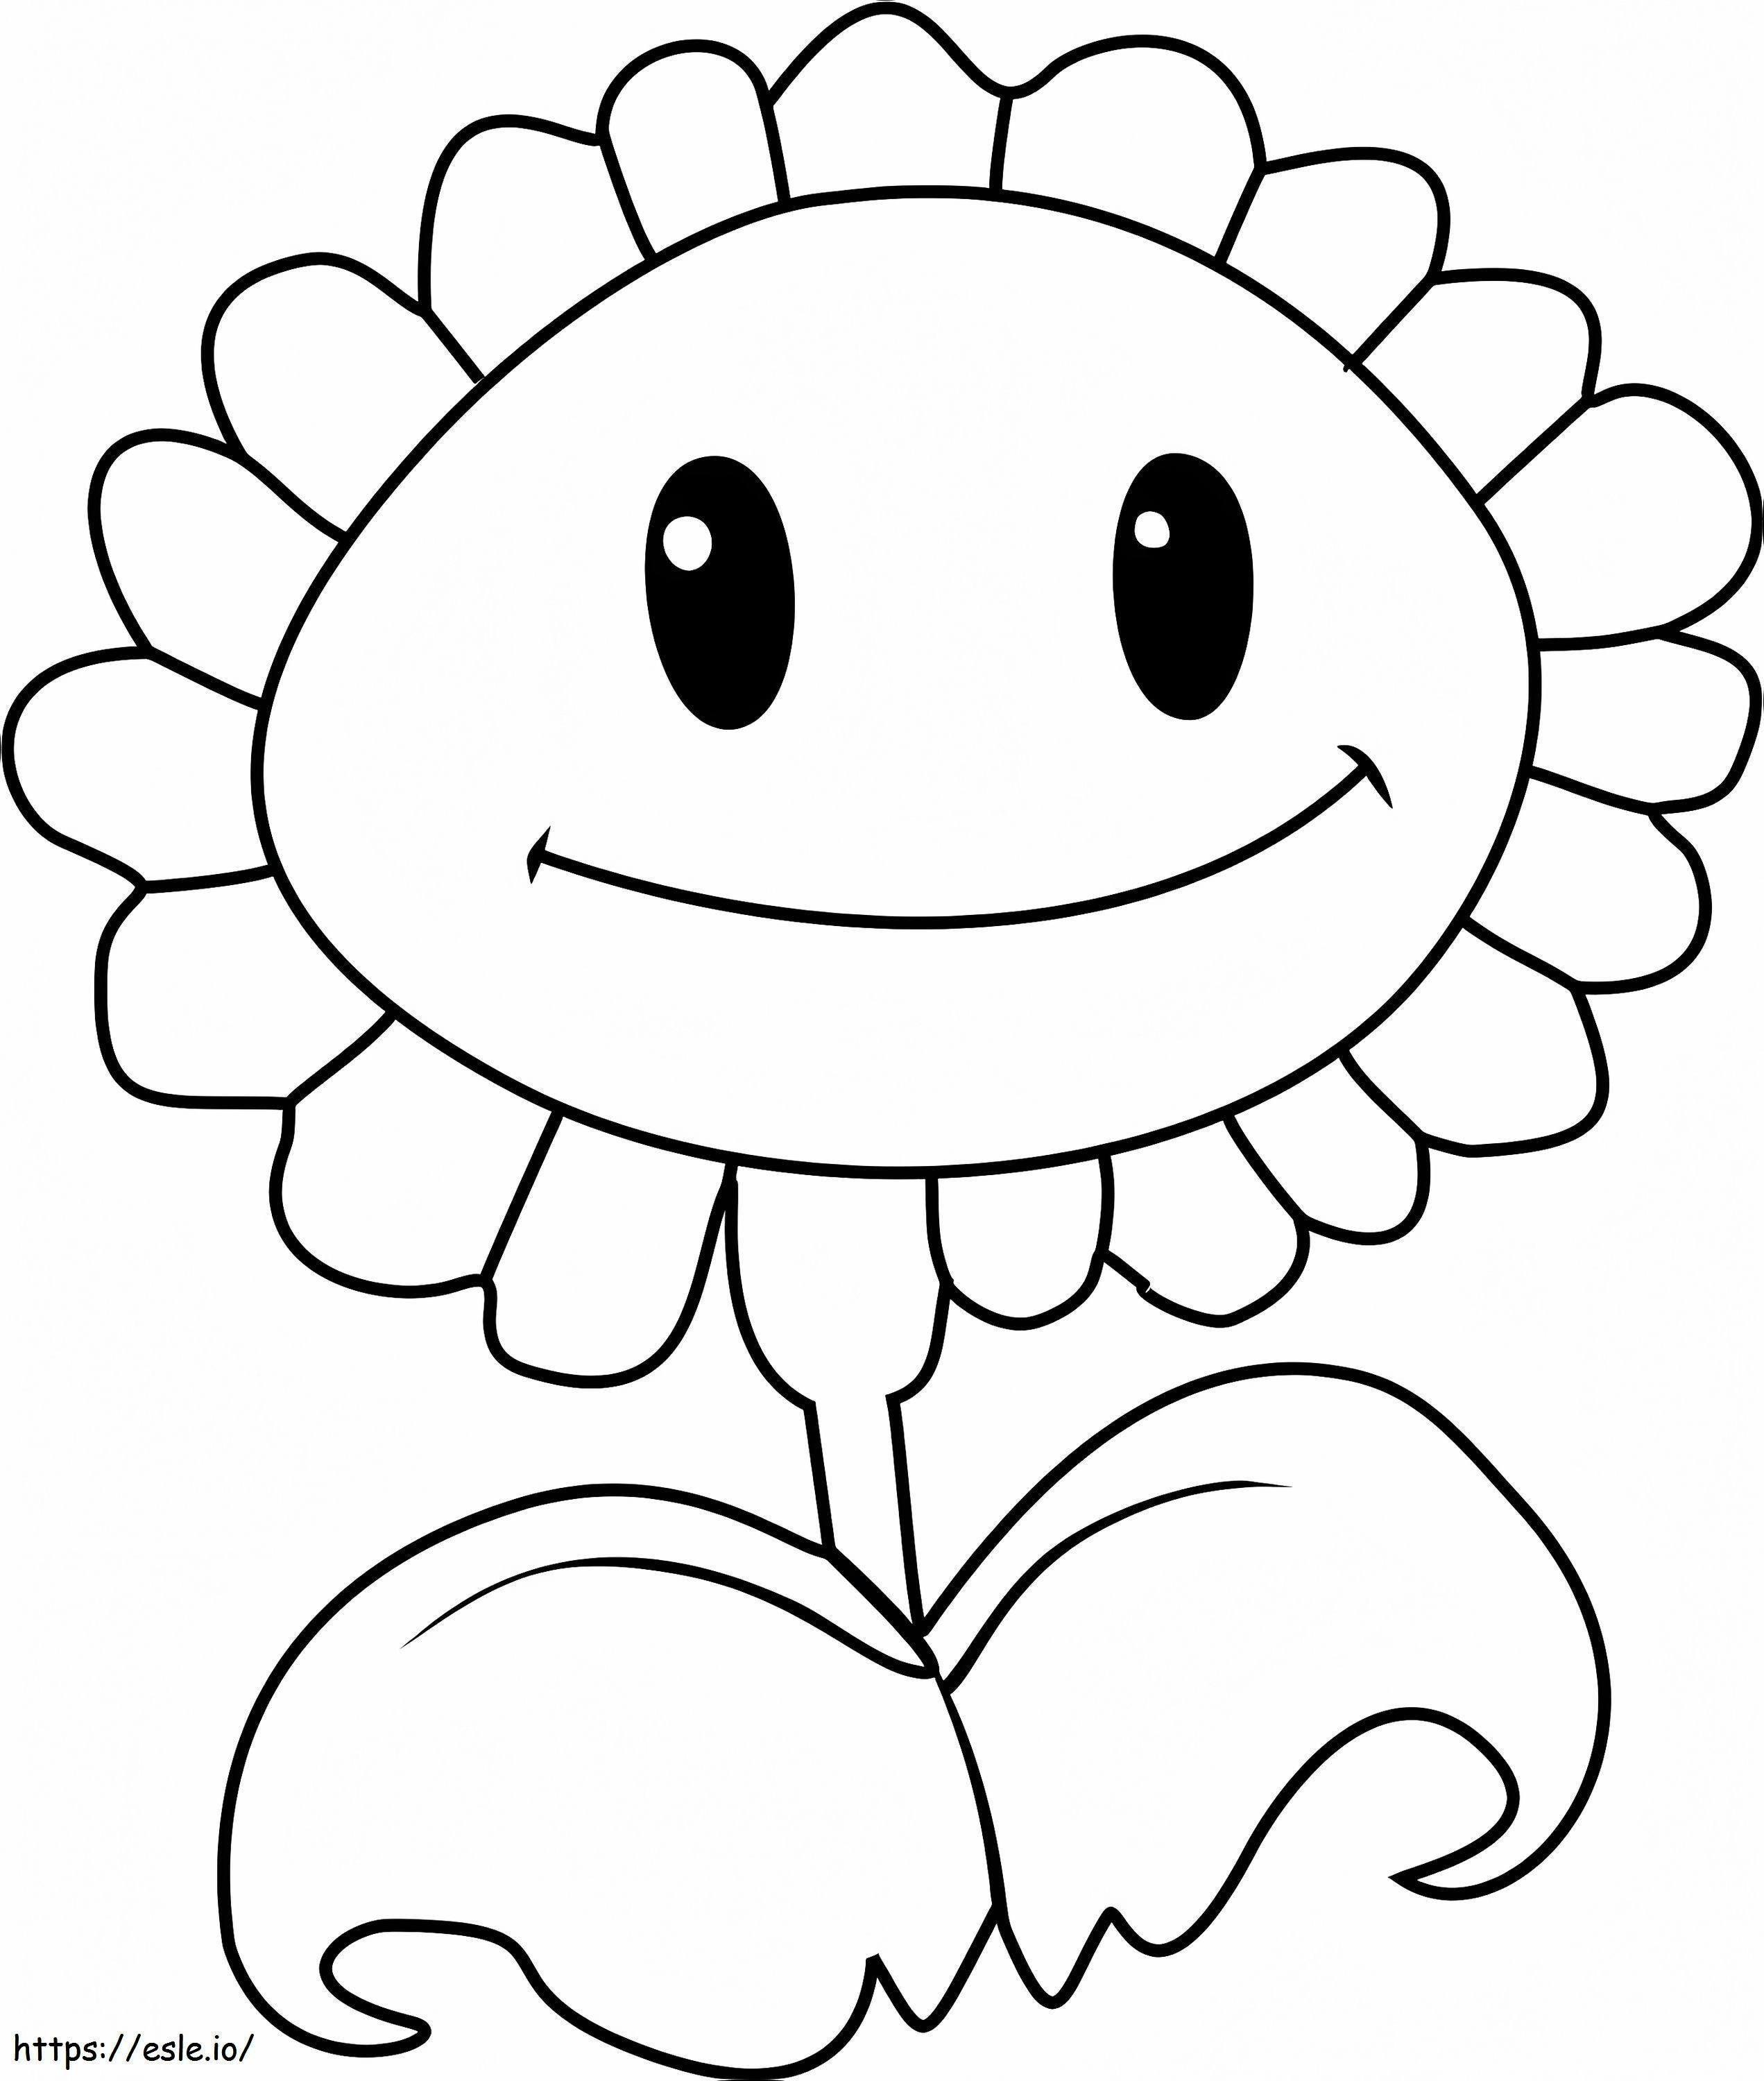 1530496677 Sunflower1 coloring page